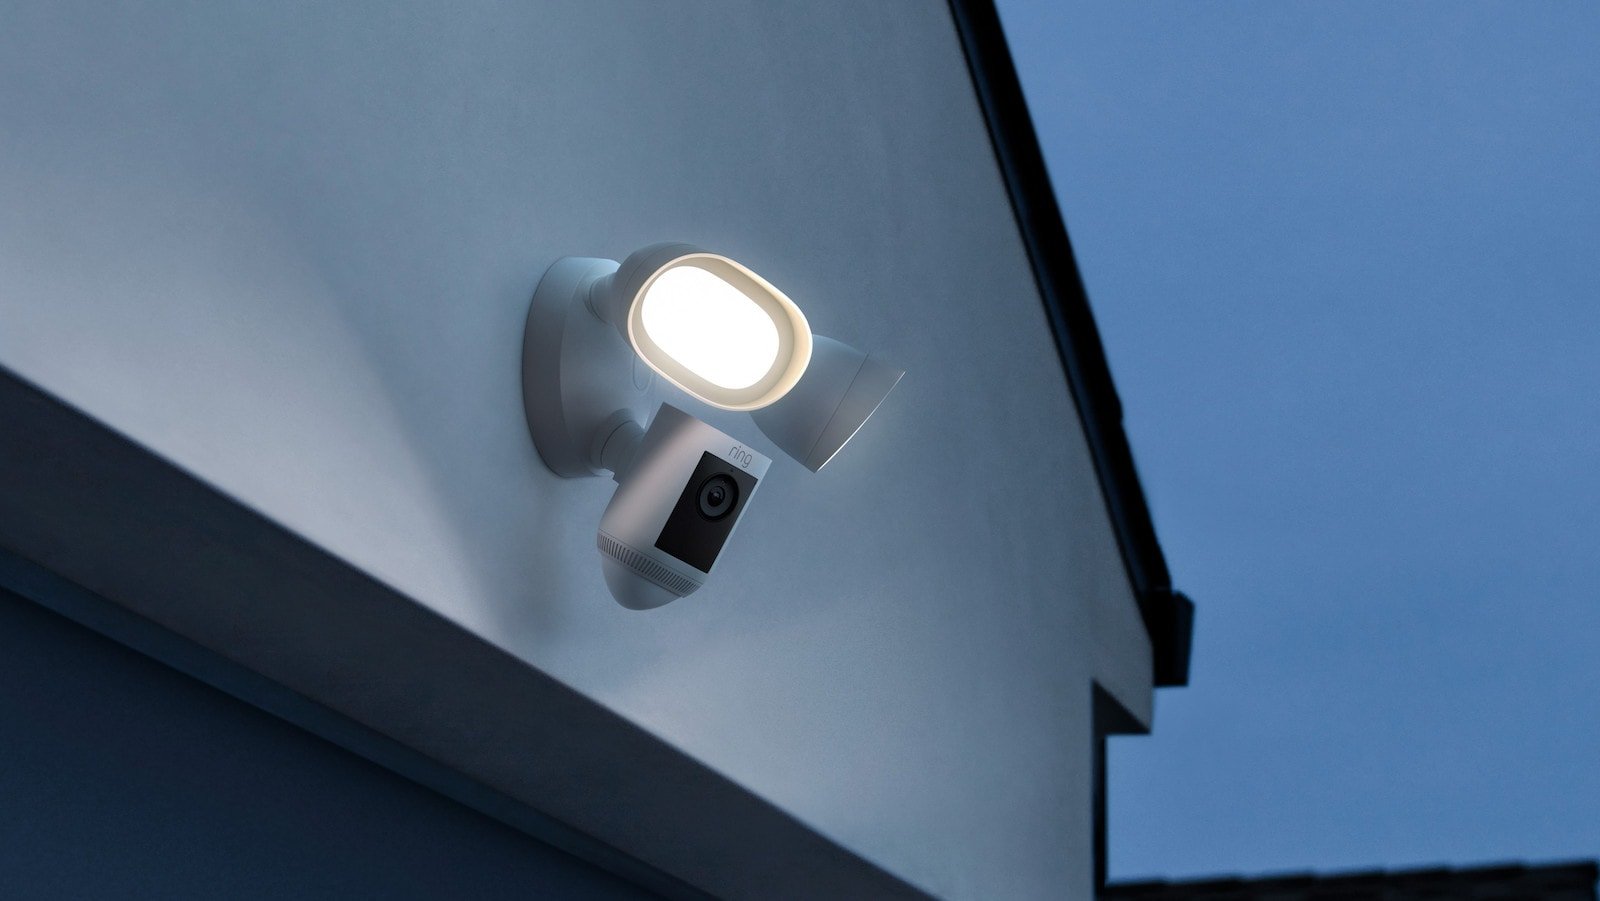 Ring Floodlight Cam Wired Pro has ultrabright LEDs and 3D Motion Detection